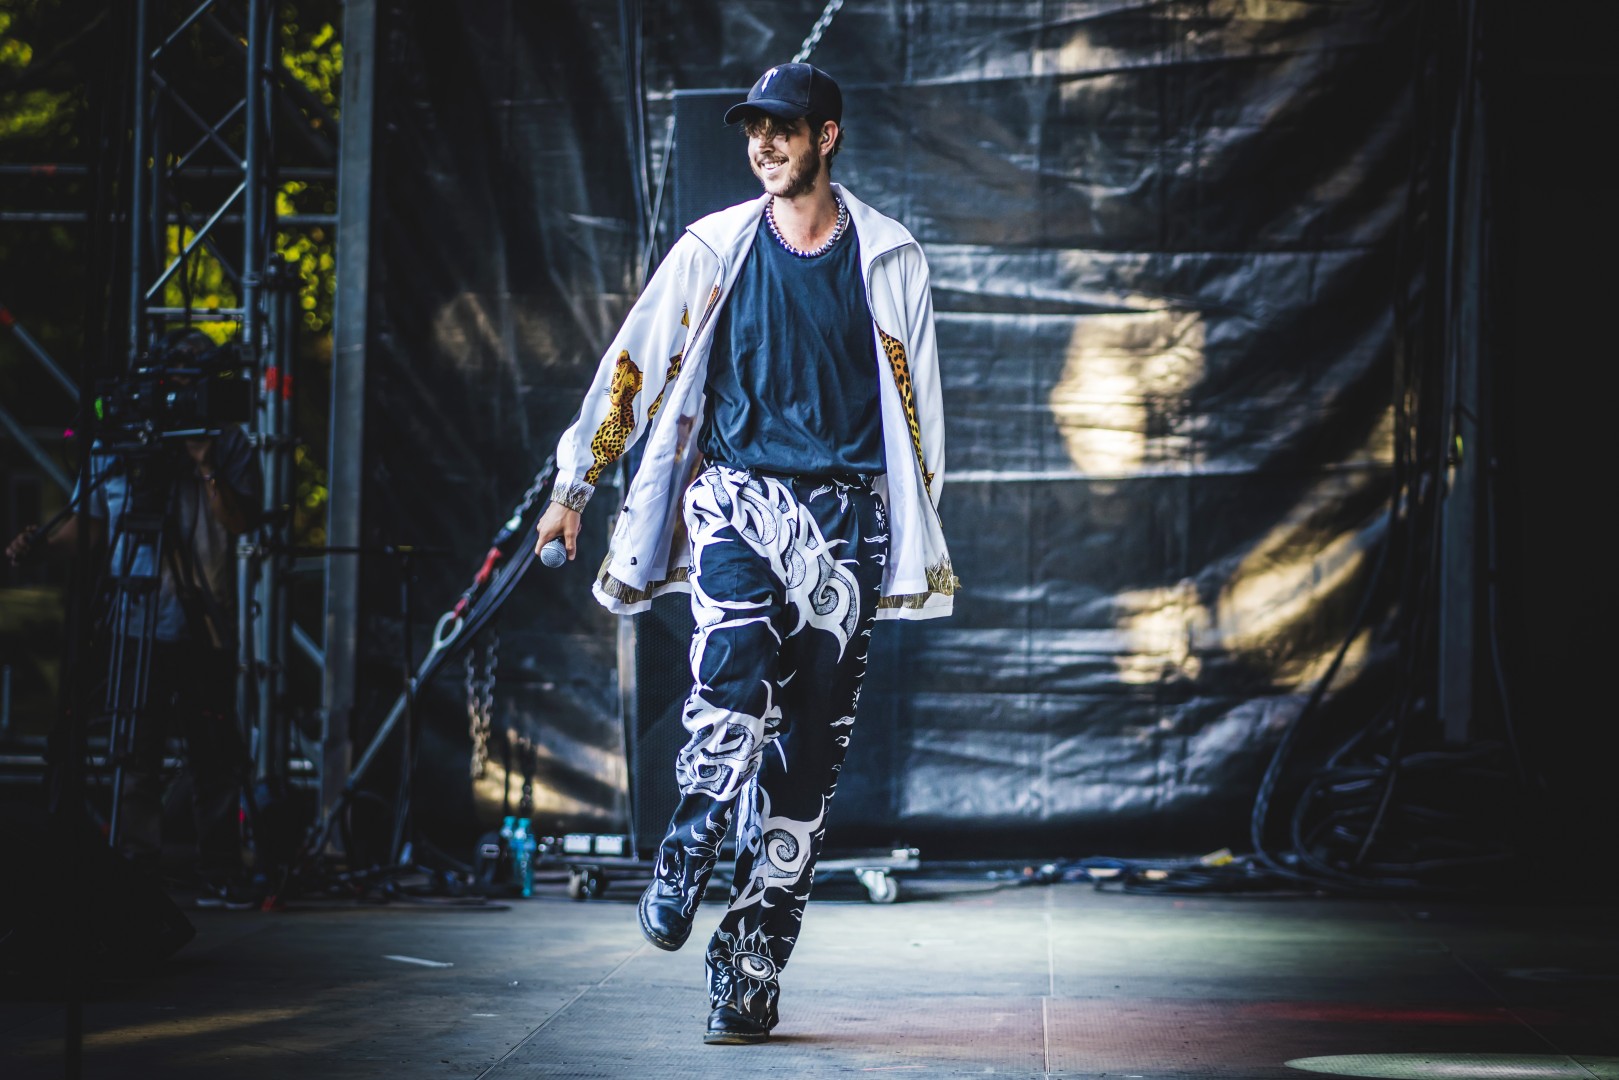 Oscar And The Wolf in Buftea on August 11, 2018 (db62ba98dc)